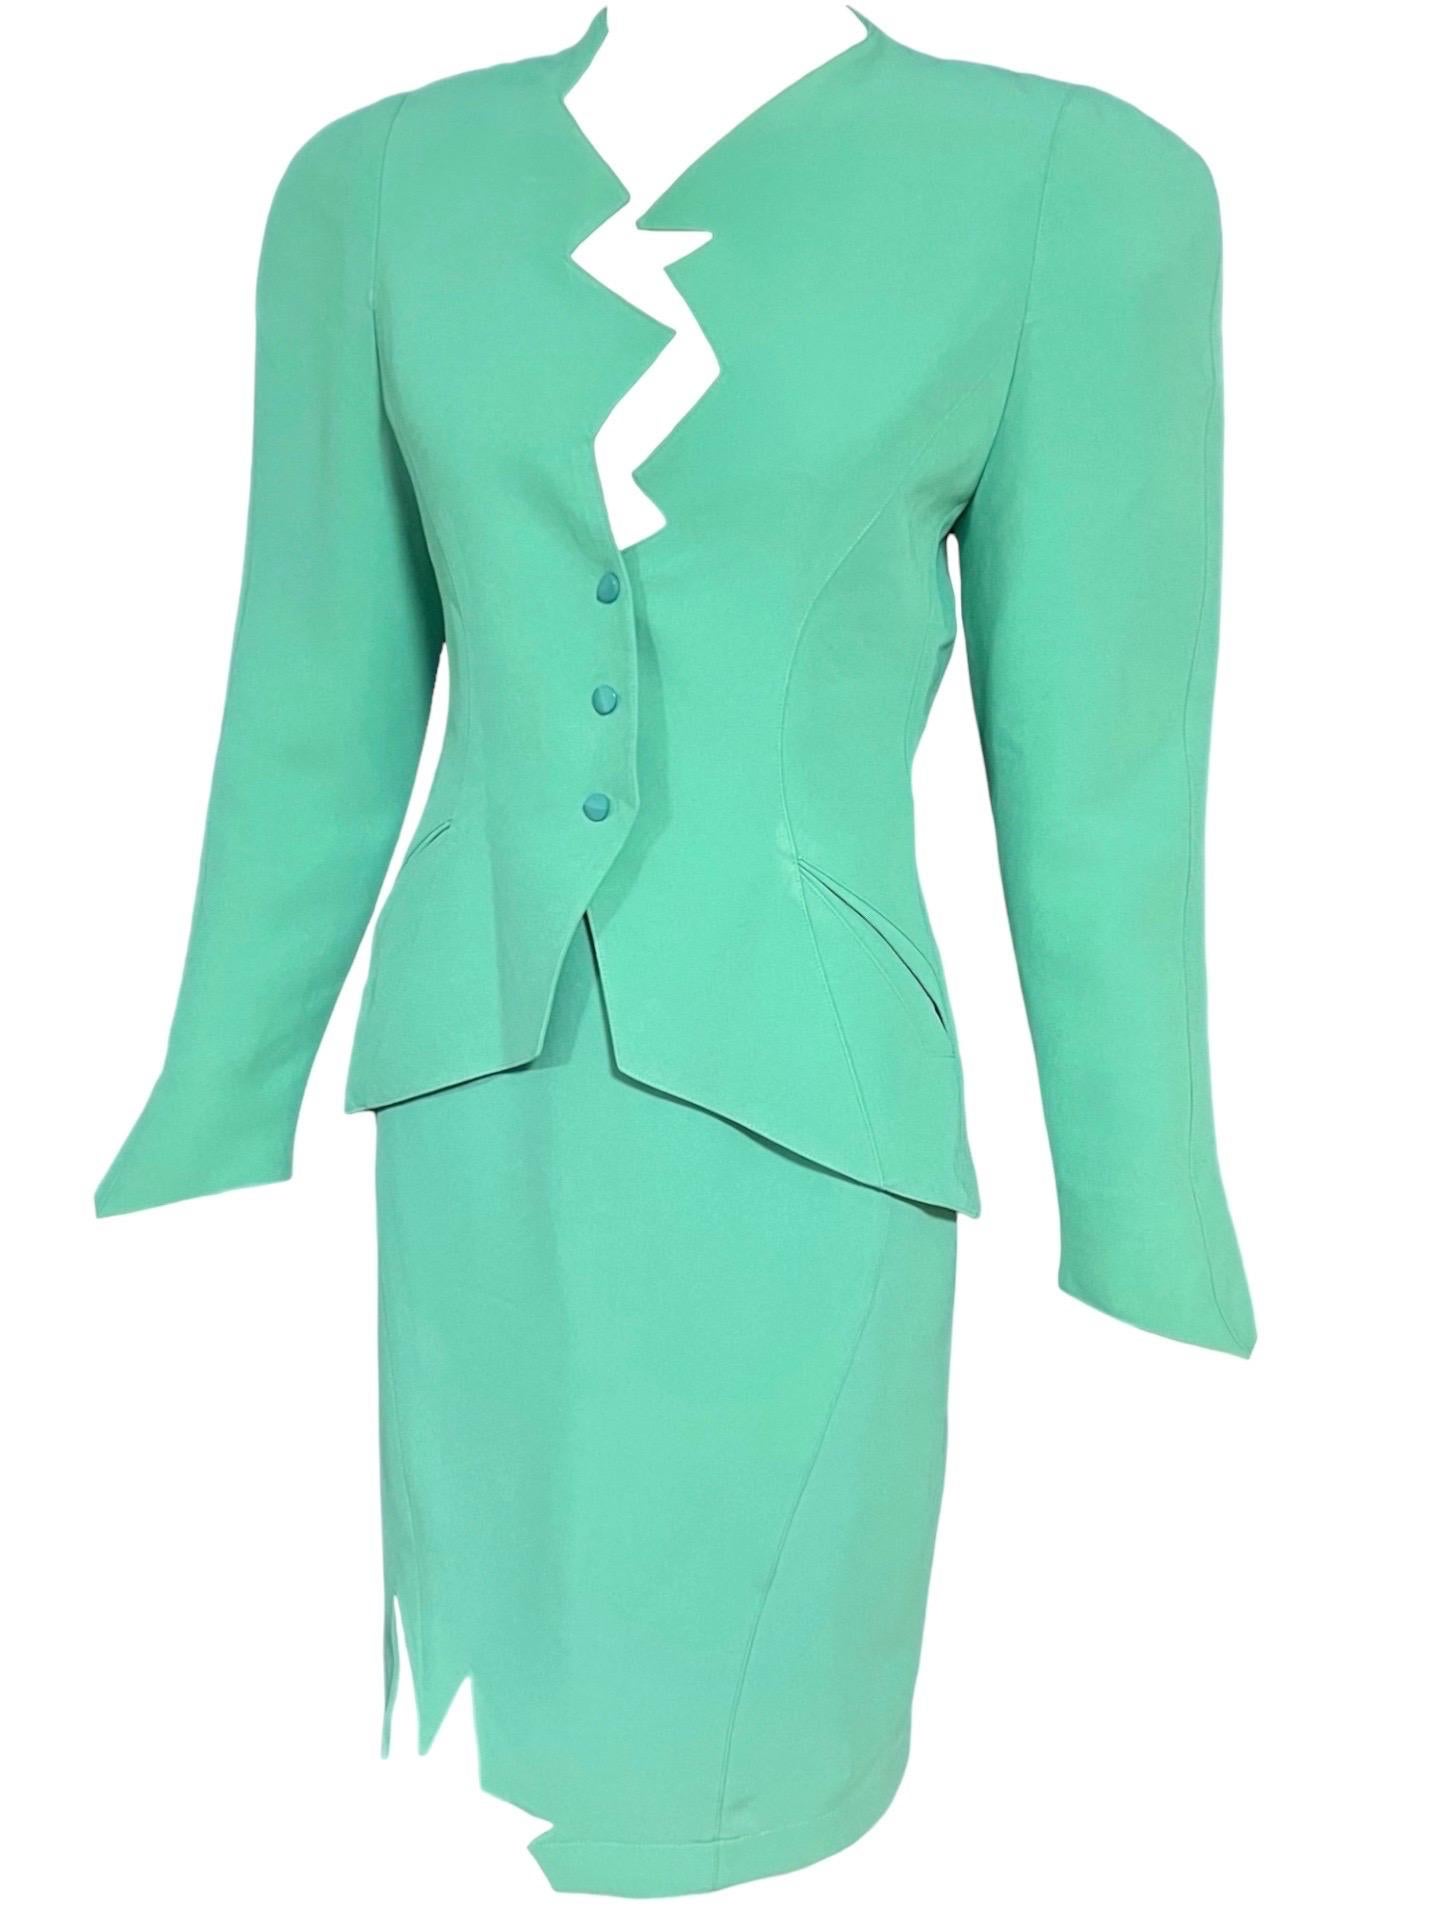 F/W 1988 Thierry Mugler Green Iconic Runway Documented Les Infernales Suit 1